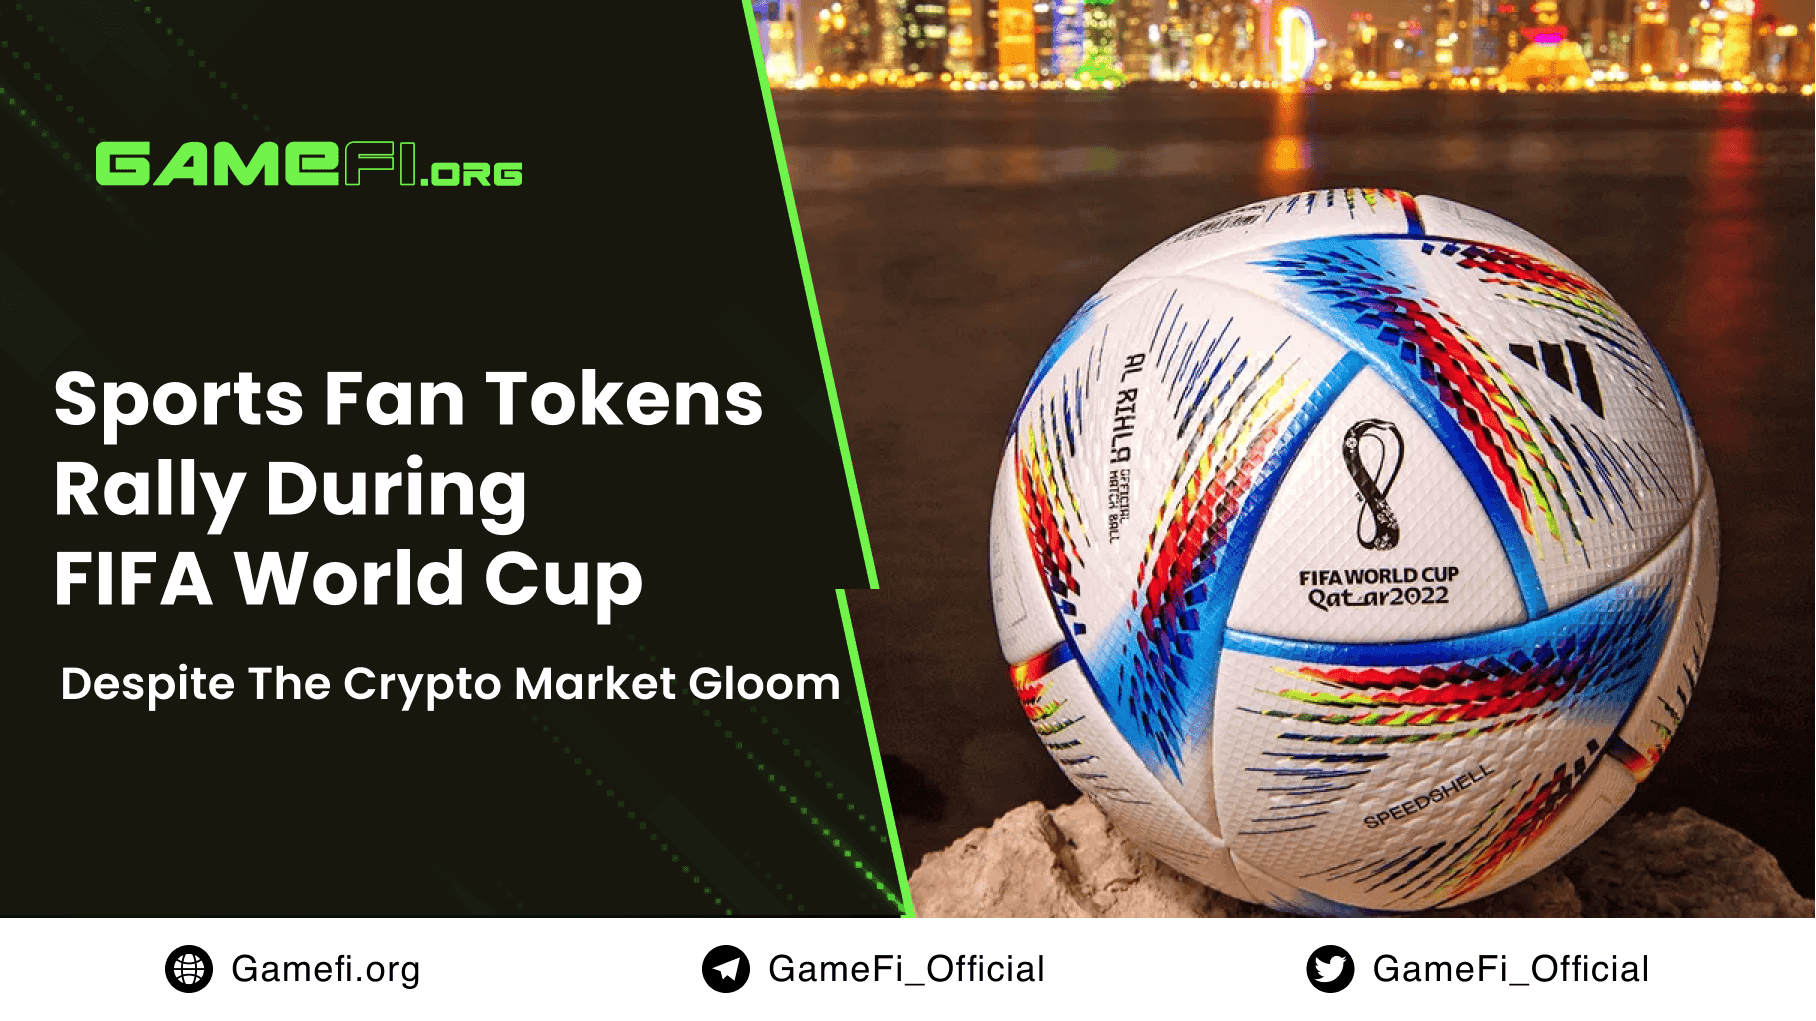 Sports Fan Tokens Rally During FIFA World Cup, Despite The Crypto Market Gloom